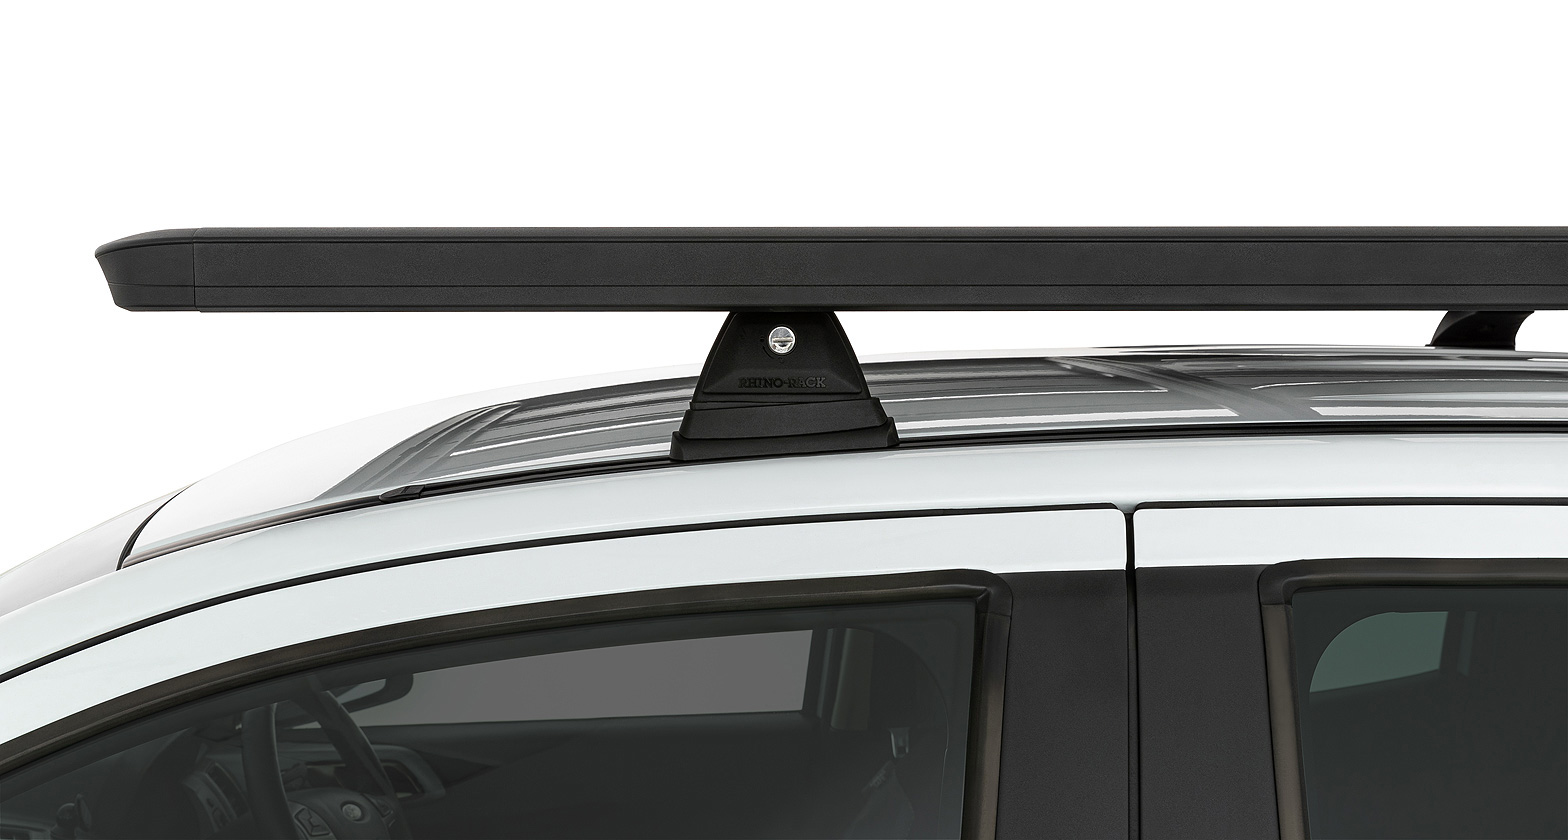 Rhino Rack JC-01677 Pioneer 6 Platform (1900mm x 1380mm) with RCH legs suits Toyota Land Cruiser 5dr 200 Series with Bare Roof (2007 to 2022) - Factory Point Mount